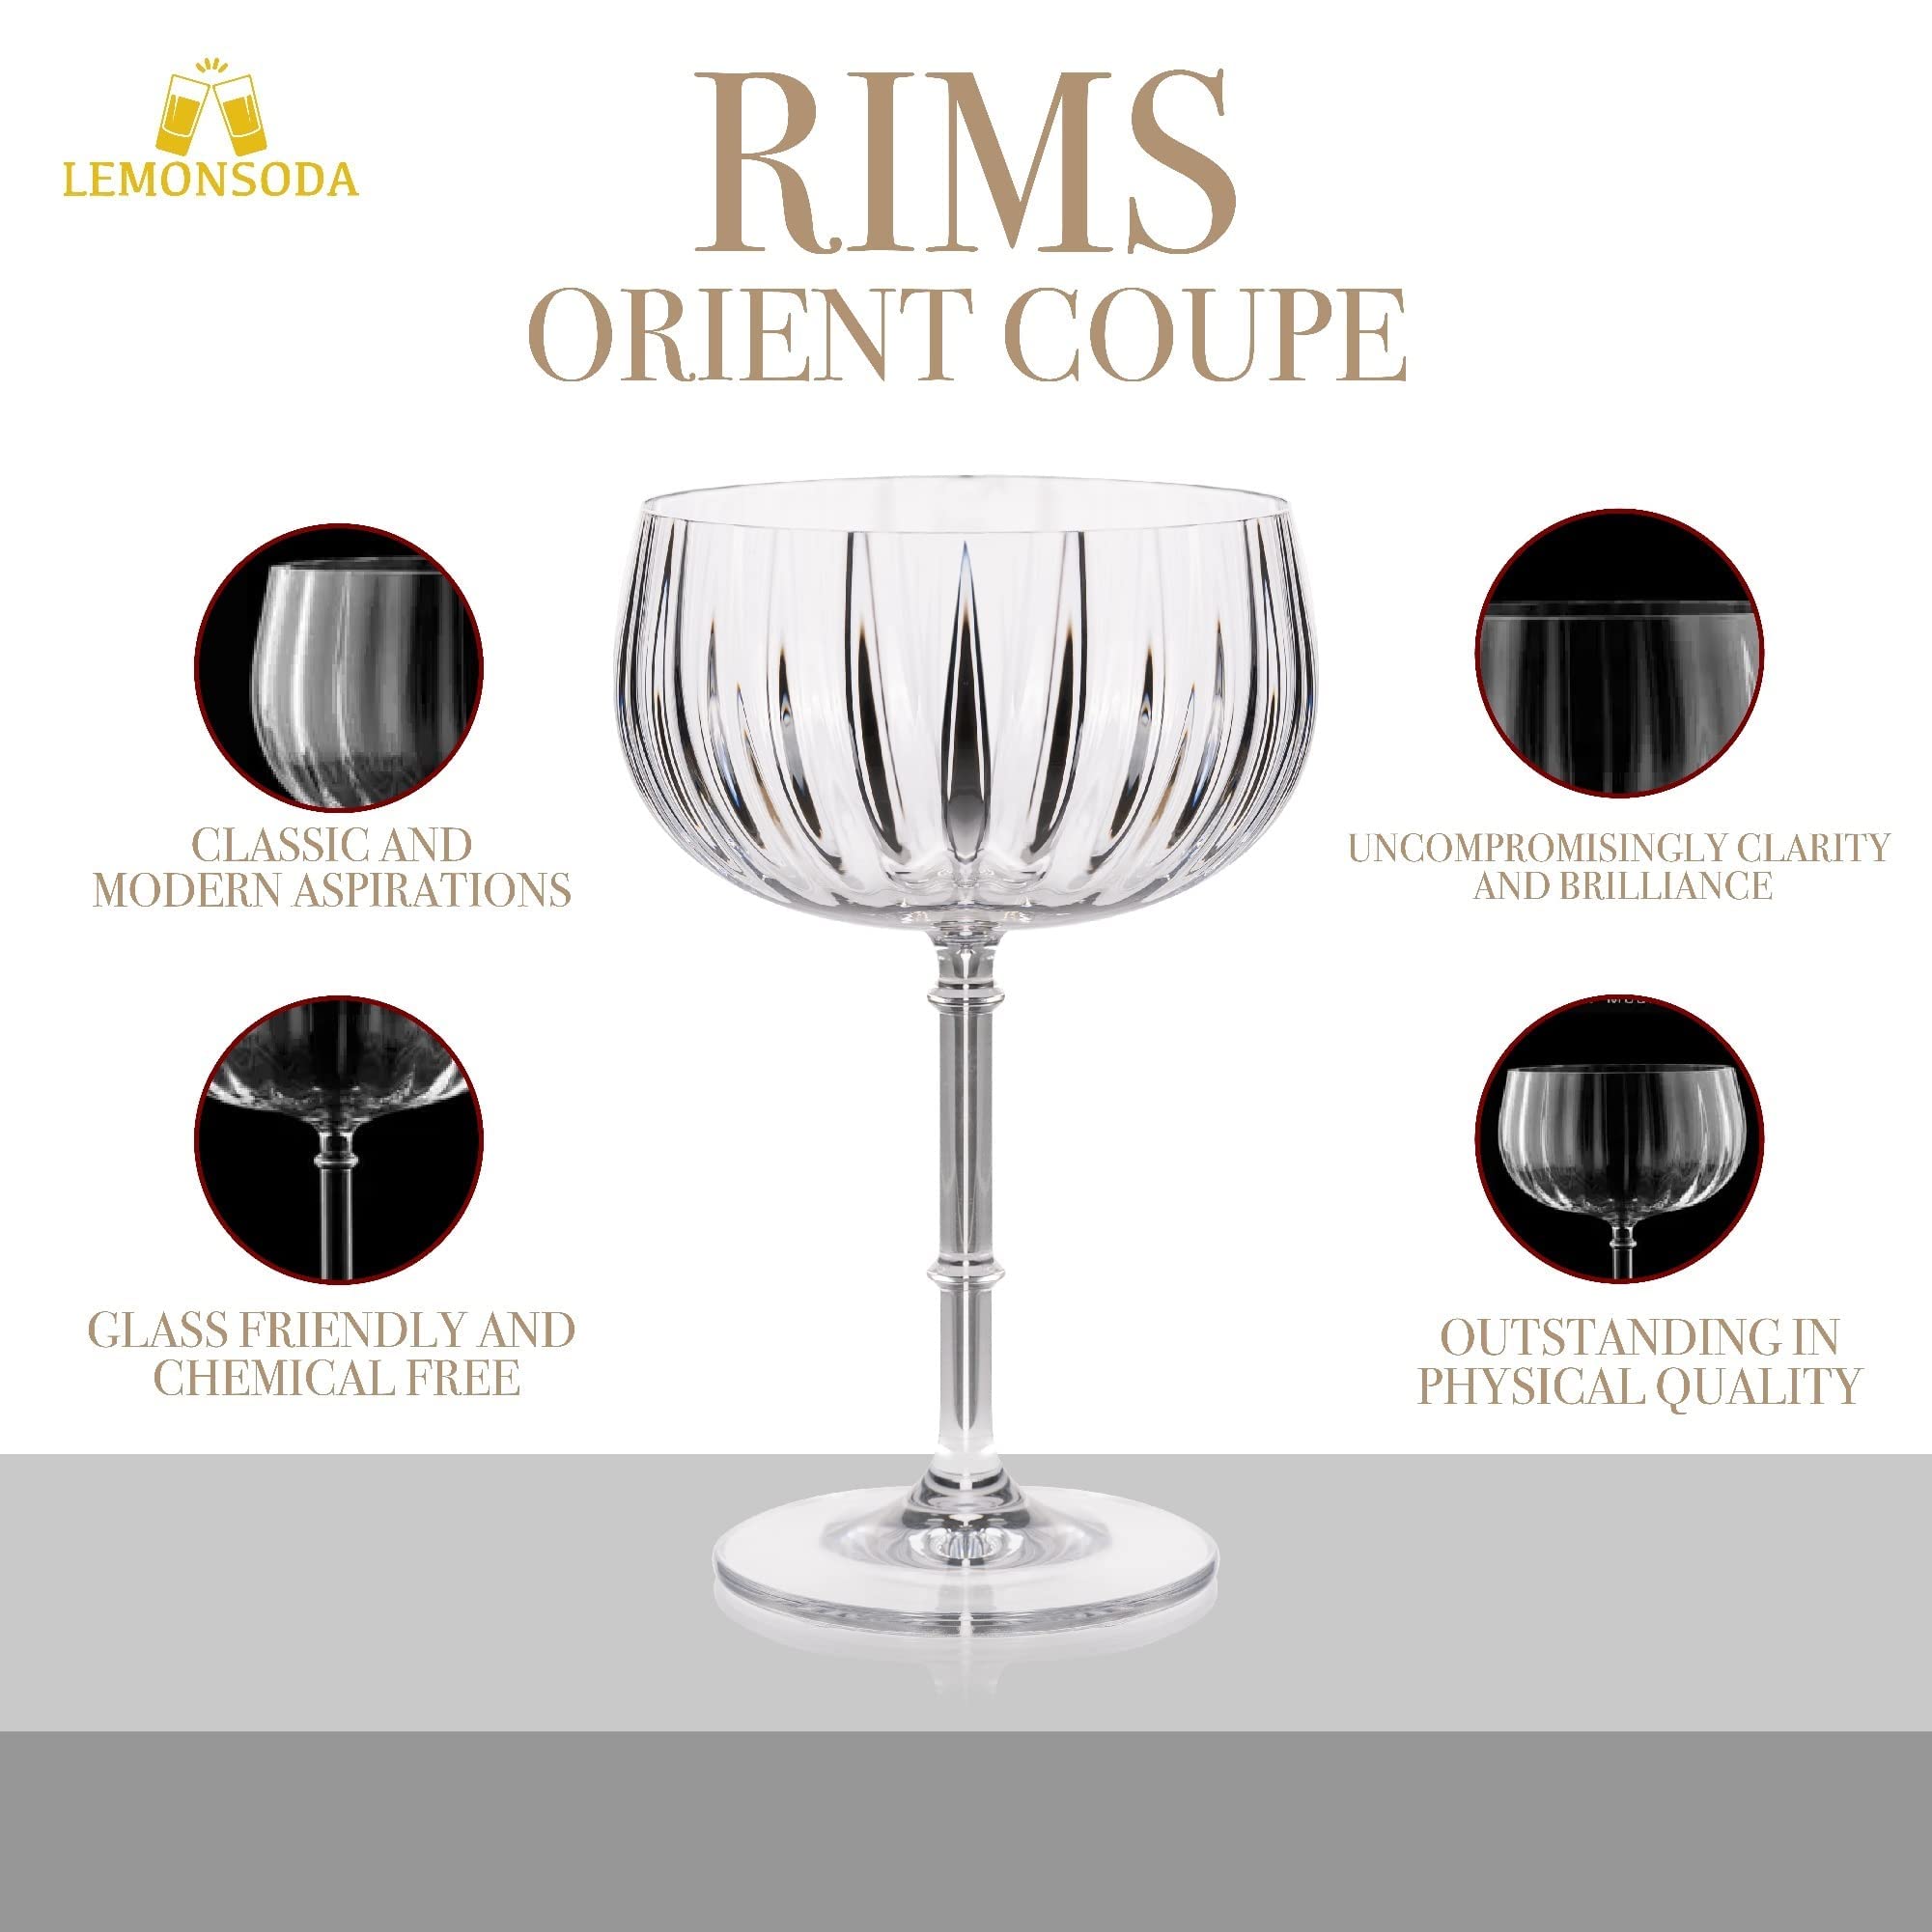 LEMONSODA Rims Orient-Coupe Cocktail Glasses - Quality Crystal Glass - Lead-free, Crystal Clear, Elegant Design, Luxury Cocktail Glass - Extra Durable - Set of 2 (Coupe)